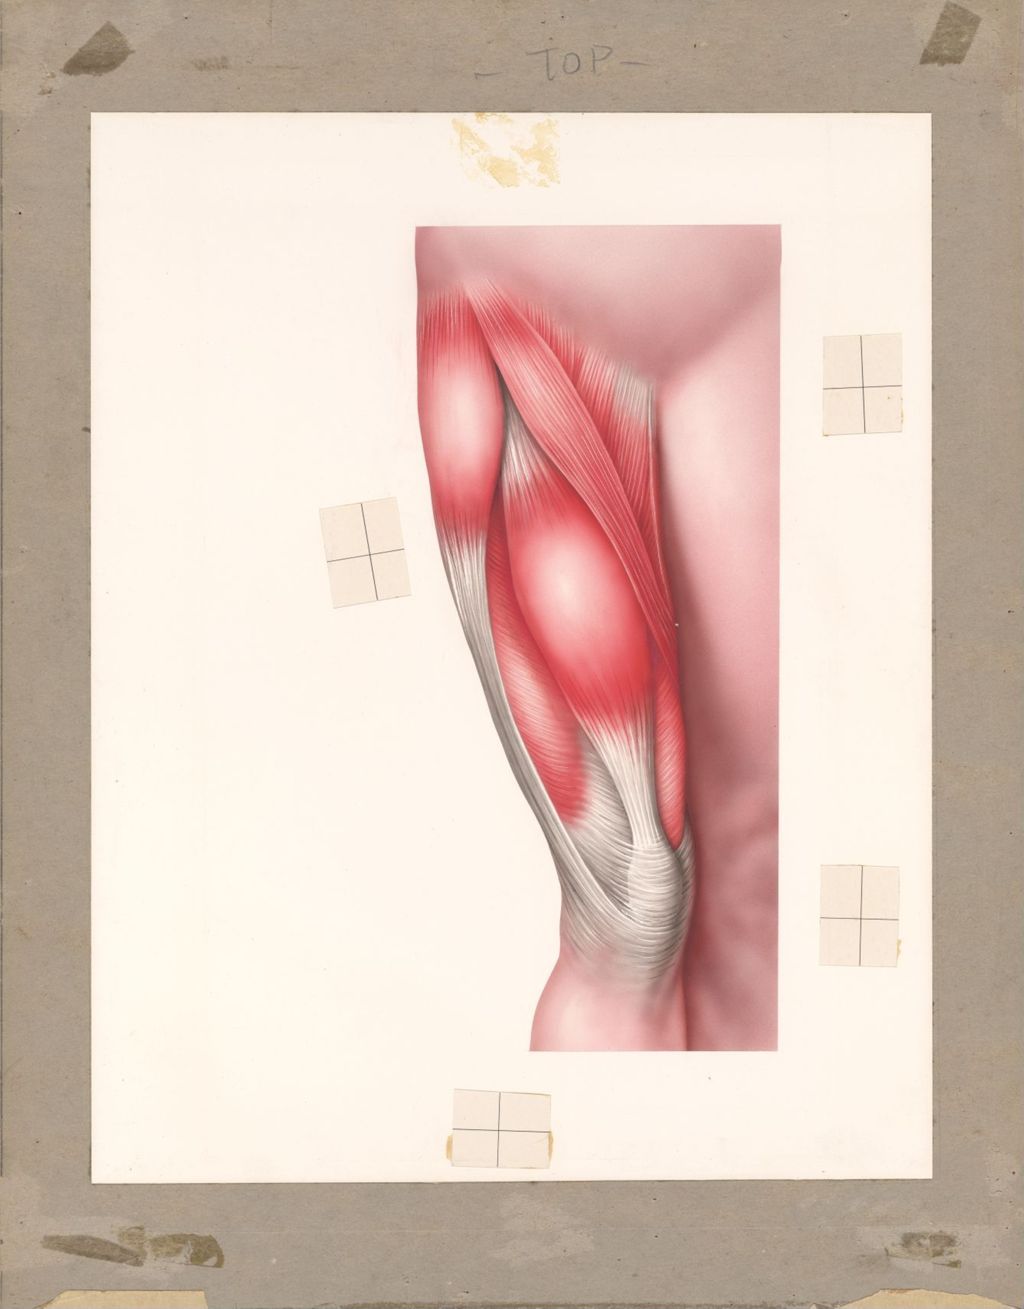 Miniature of Muscle Spasm